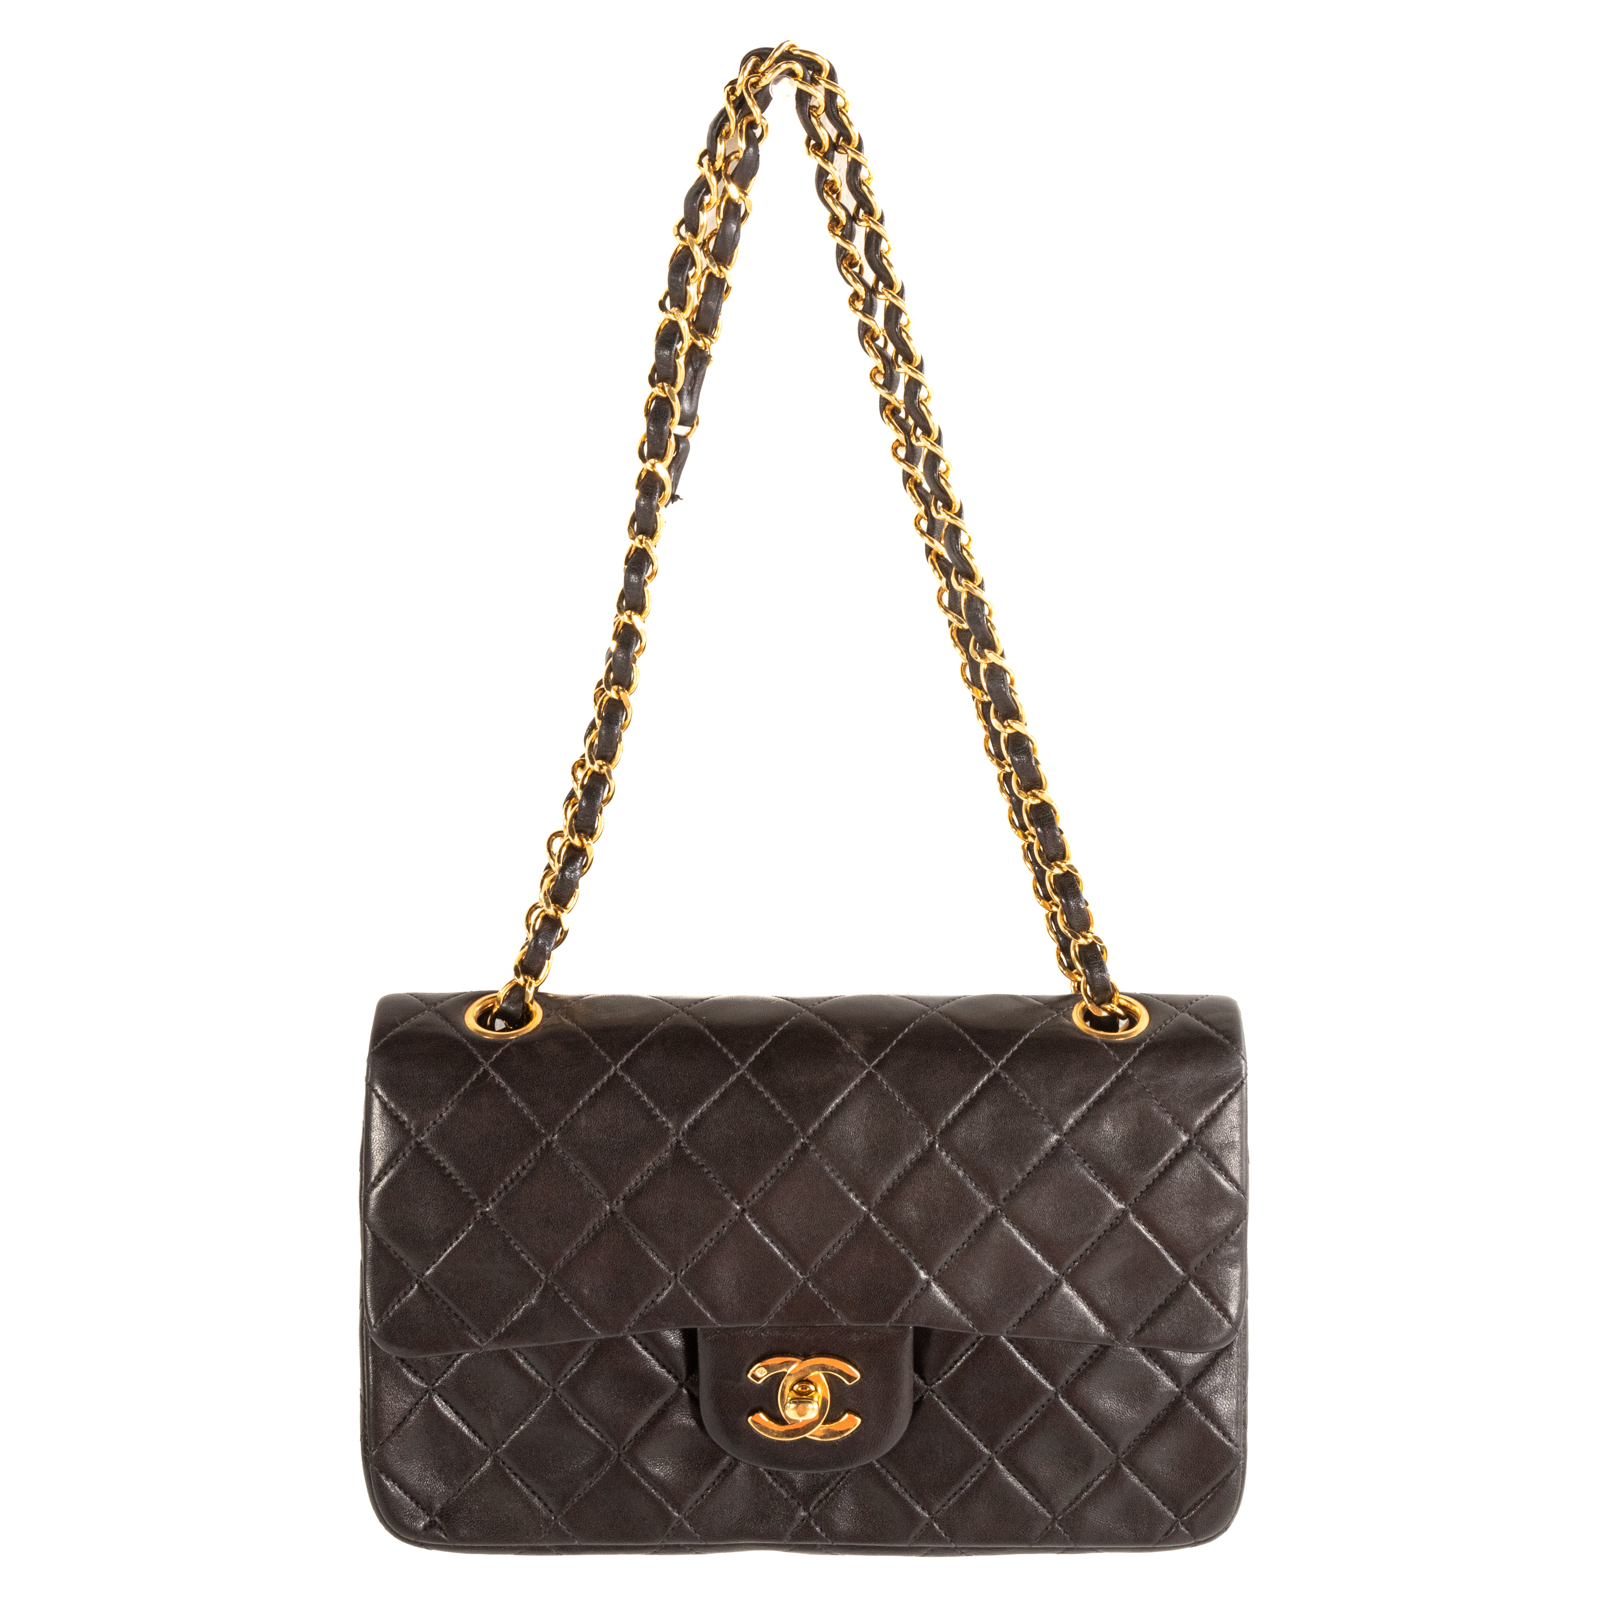 A CHANEL SMALL CLASSIC DOUBLE FLAP 2ea739